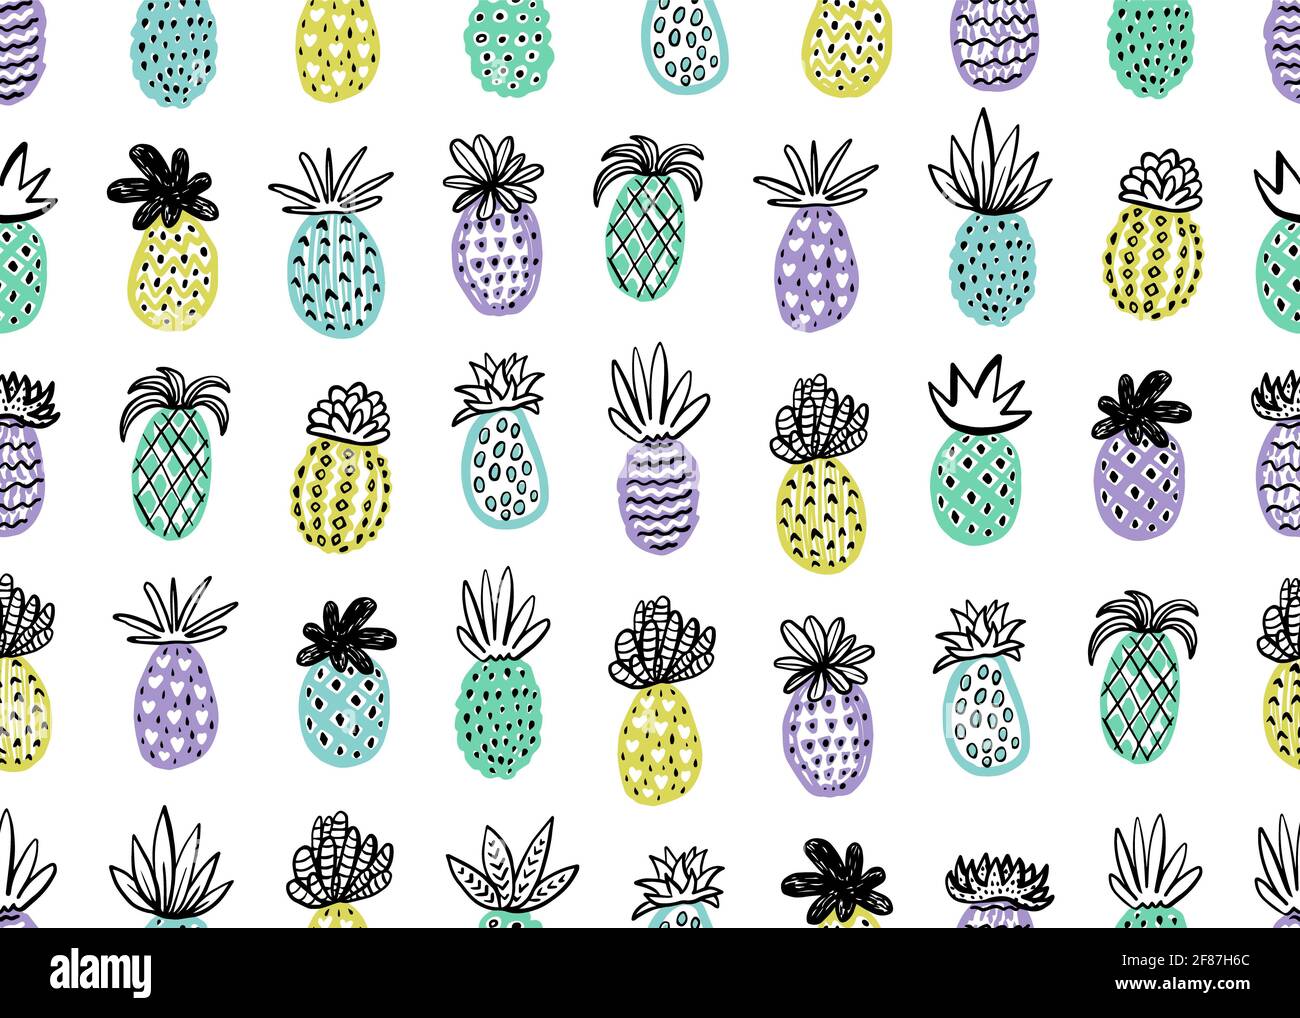 Seamless pineapple pattern. Handdrawn Pineapple with different textures in pastel colors. Exotic fruits background For Fashion print, textile, fabric, Stock Photo